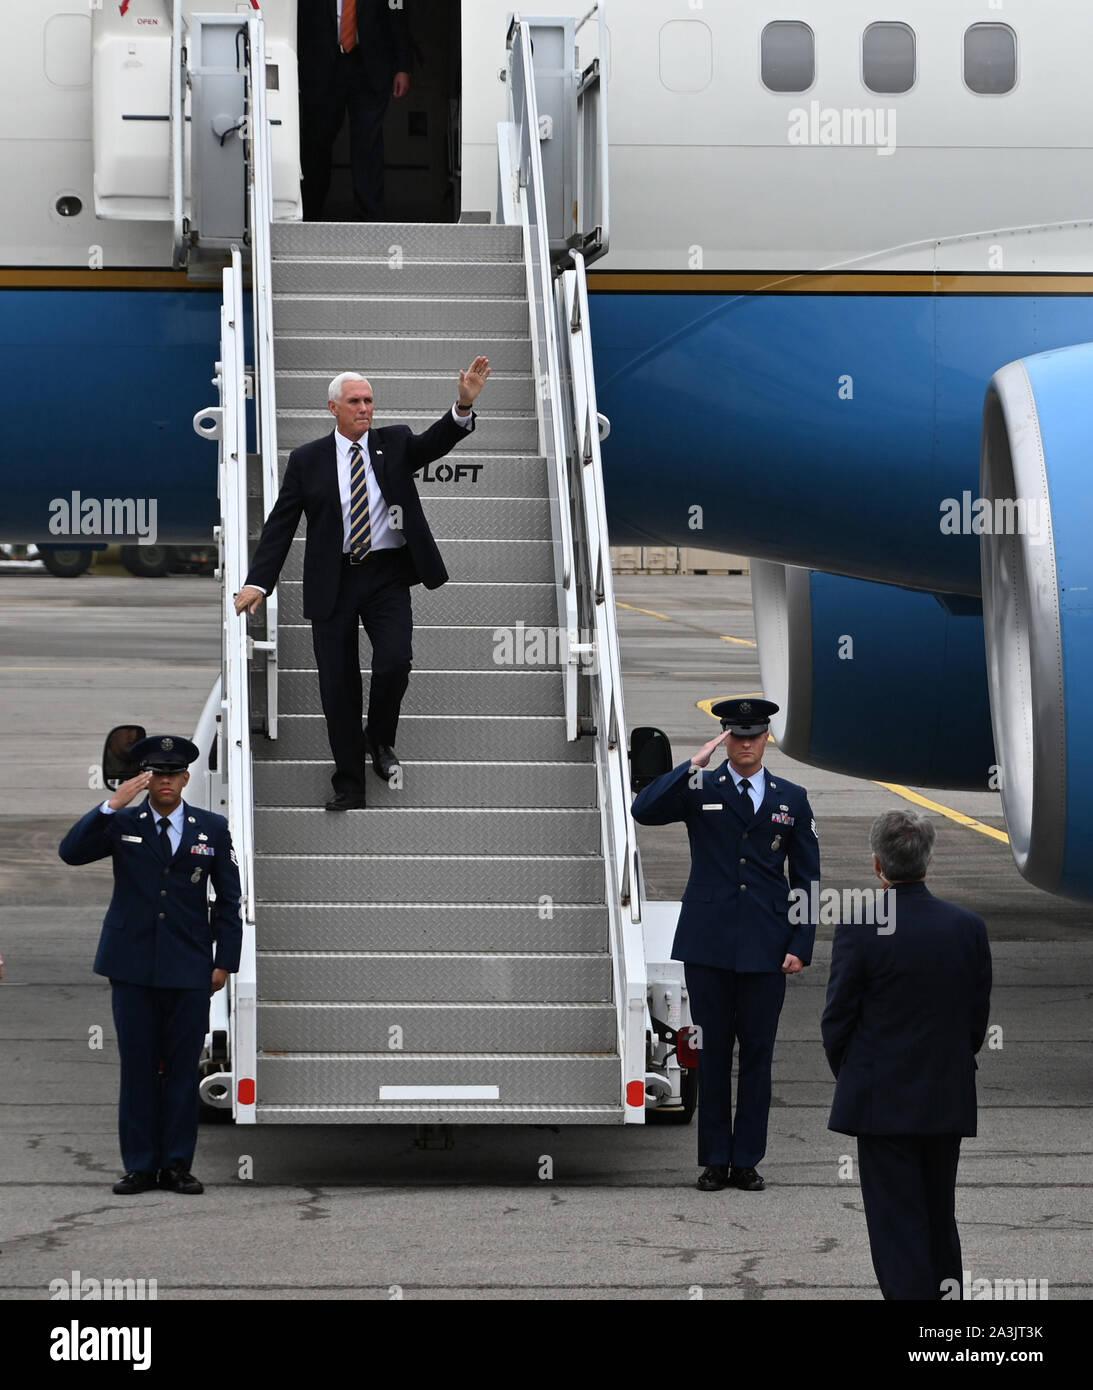 Vice President Mike Pence waves to people from the ramp Oct. 7, 2019 at Berry Field Air National Guard Base, Nashville, Tenn. Pence briefly visited with people at Berry Field before leaving for several events in the greater Nashville area. (U.S. Air National Guard photo by Staff Sgt. Anthony Agosti) Stock Photo